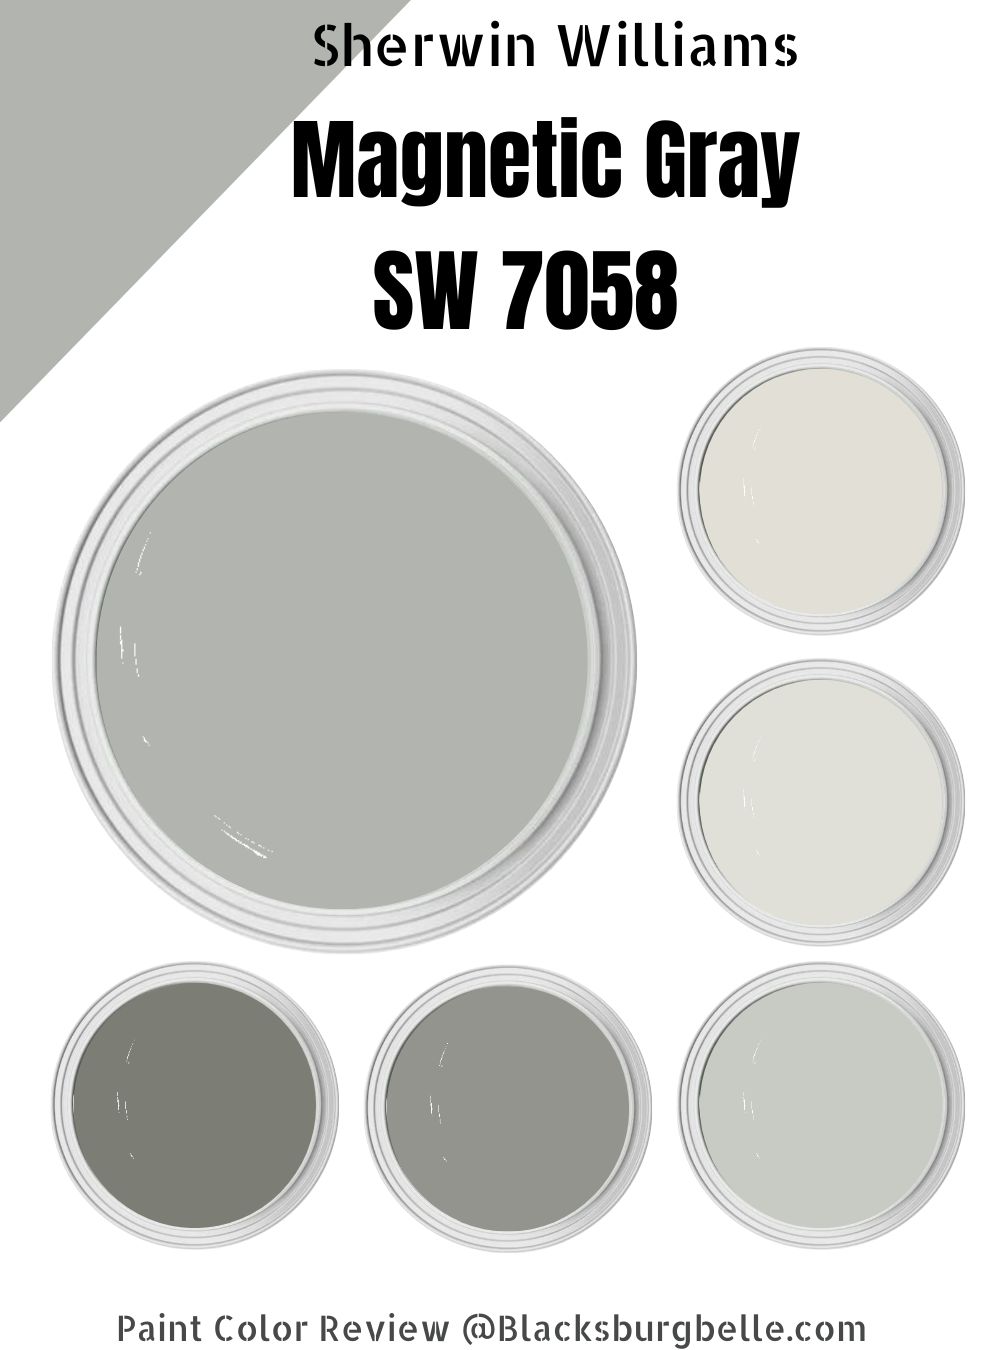 Sherwin Williams Magnetic Gray Paint Color Review